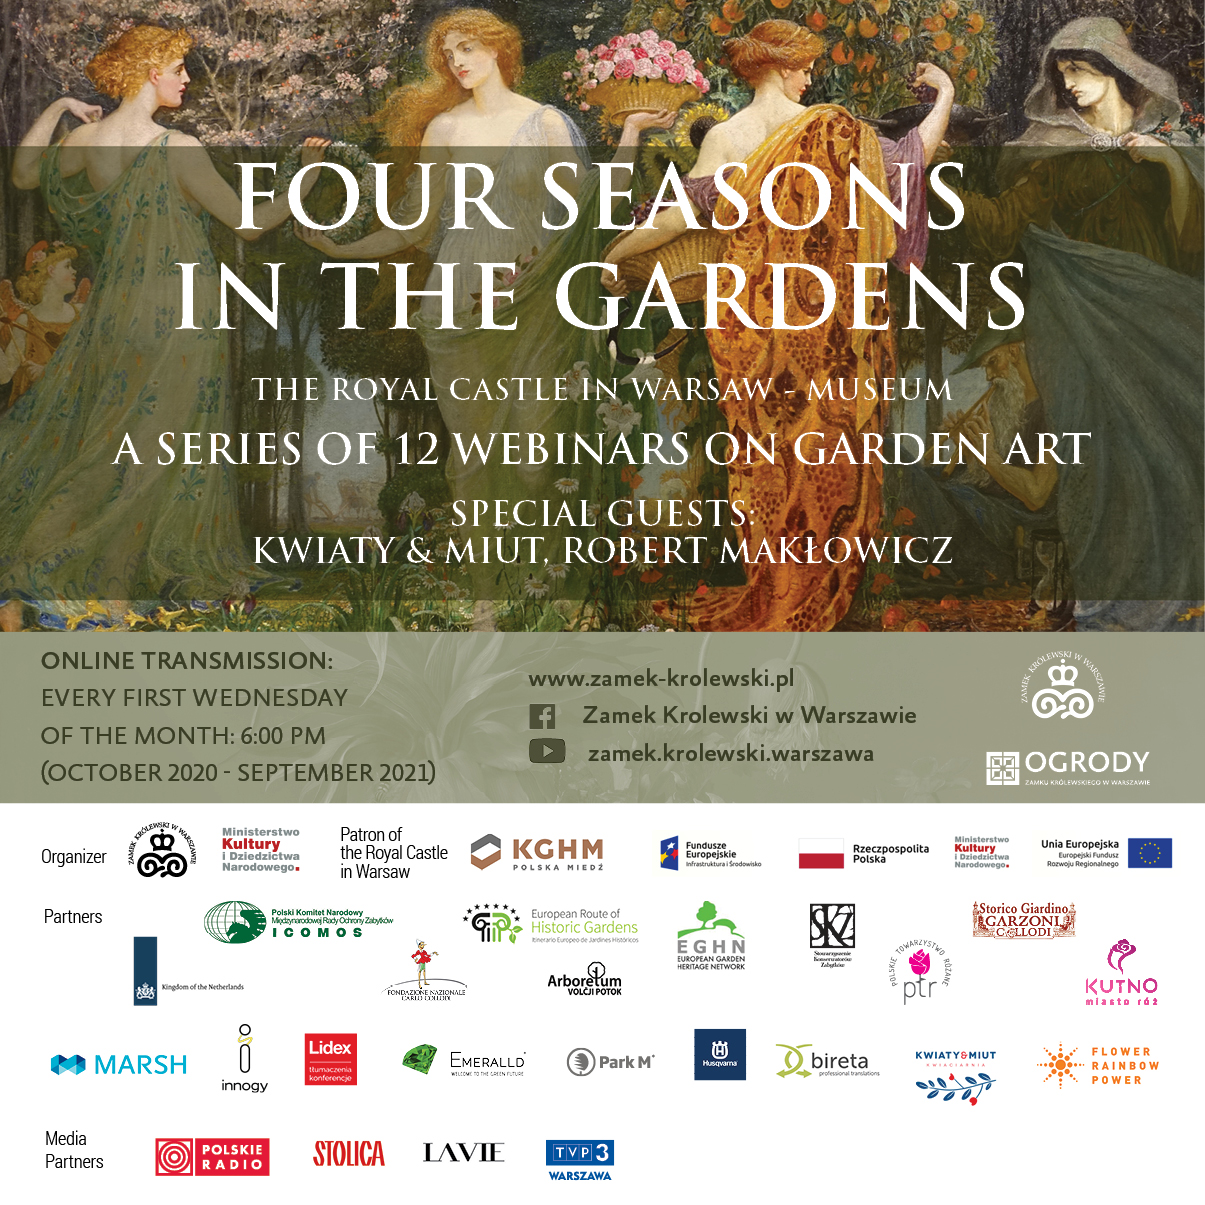  Four Seasons in the Gardens  A series of 12 webinars on garden art  October 2020 – September 2021  The Royal Castle in Warsaw – Museum: online  The series of twelve webinars is a great journey through the most outstanding garden arrangements in Europe. The four parts of the event are dictated by the seasons, which finally combine into a coherent whole, creating a determinant of the idea and synergy between art and garden. Wonderful specialists in the field of garden art will introduce us to issues inspired by wonderful historical gardens. Thematic flower arrangements made by the fantastic Duet of Kwiaty & Miut will make garden considerations more pleasant, showing that trends in the history of garden art can also be presented in a non-obvious way, in harmony with nature and with triggering experiences that cannot be resisted surrounded by flowers.  The irreplaceable Robert Makłowicz will present issues related to the history of cooking, table culture and recipes inspired by plants and seasons in gardens.  4 seasons